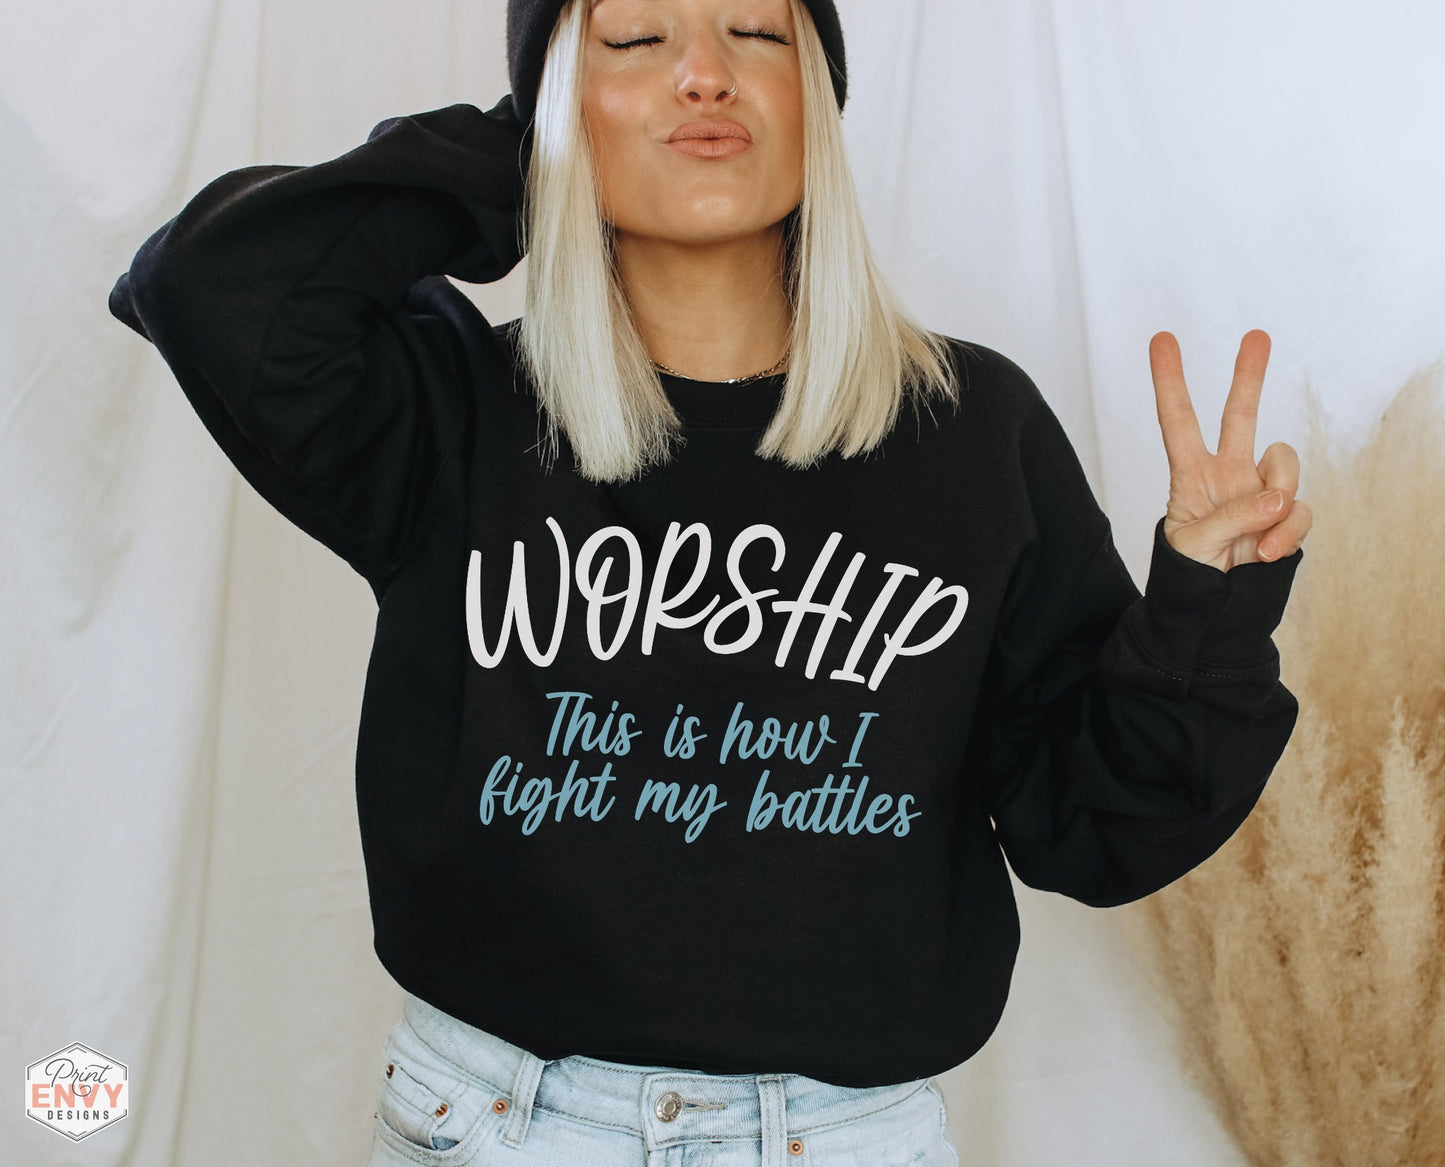 Worship This Is How I Fight My Battles Christian aesthetic unisex crewneck sweatshirt design printed in white and teal on cozy black sweater for women, great gift for worship leaders